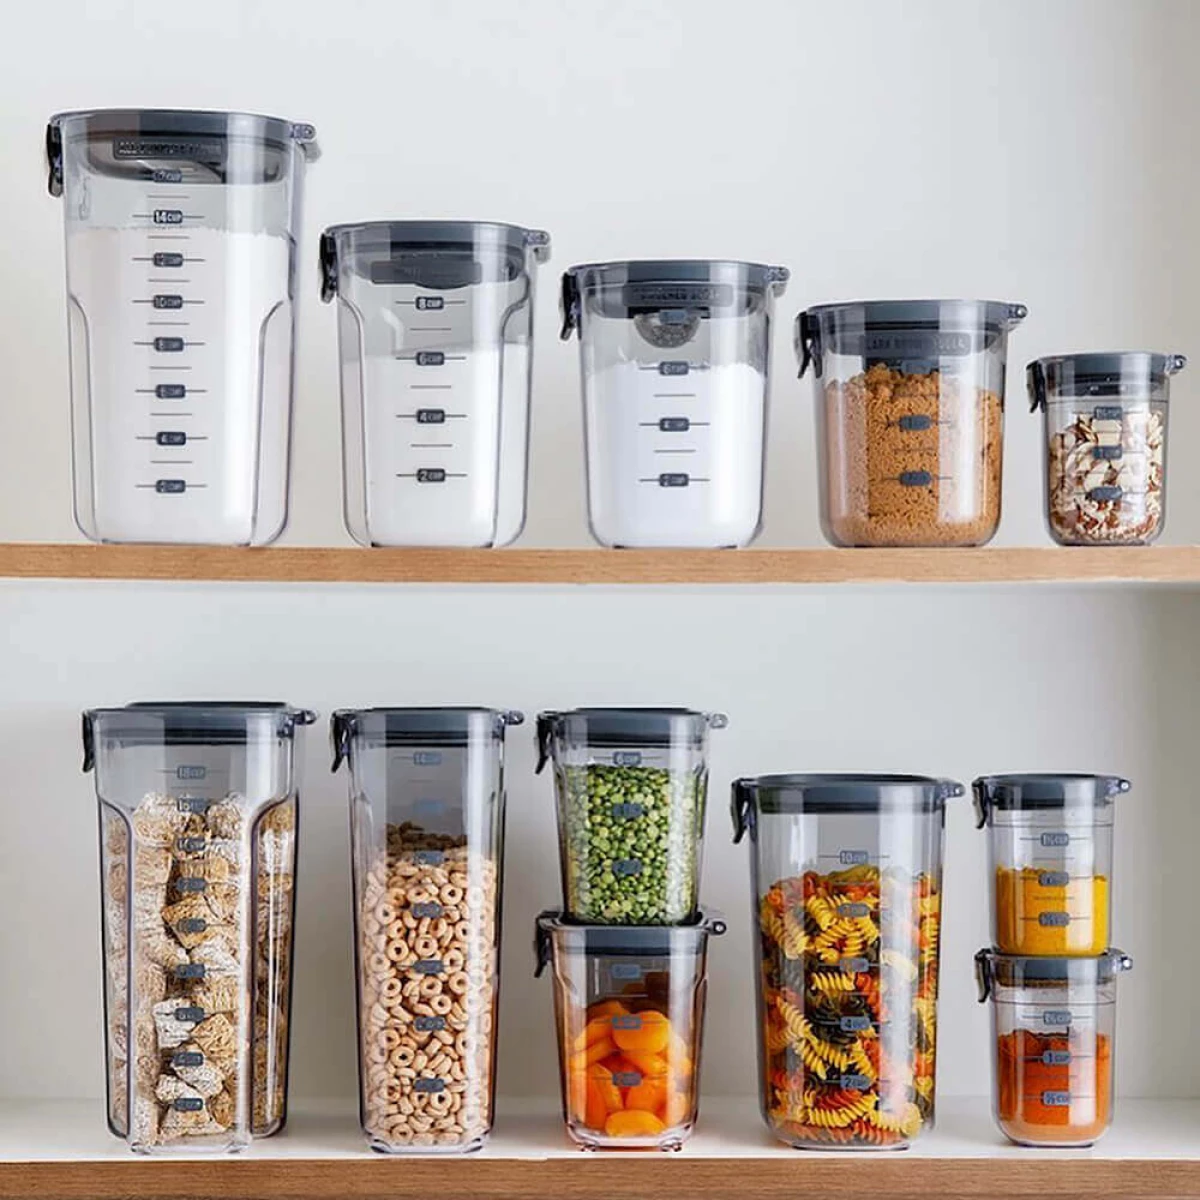 Prokeeper+ Coffee Storage Container - King Arthur Baking Company